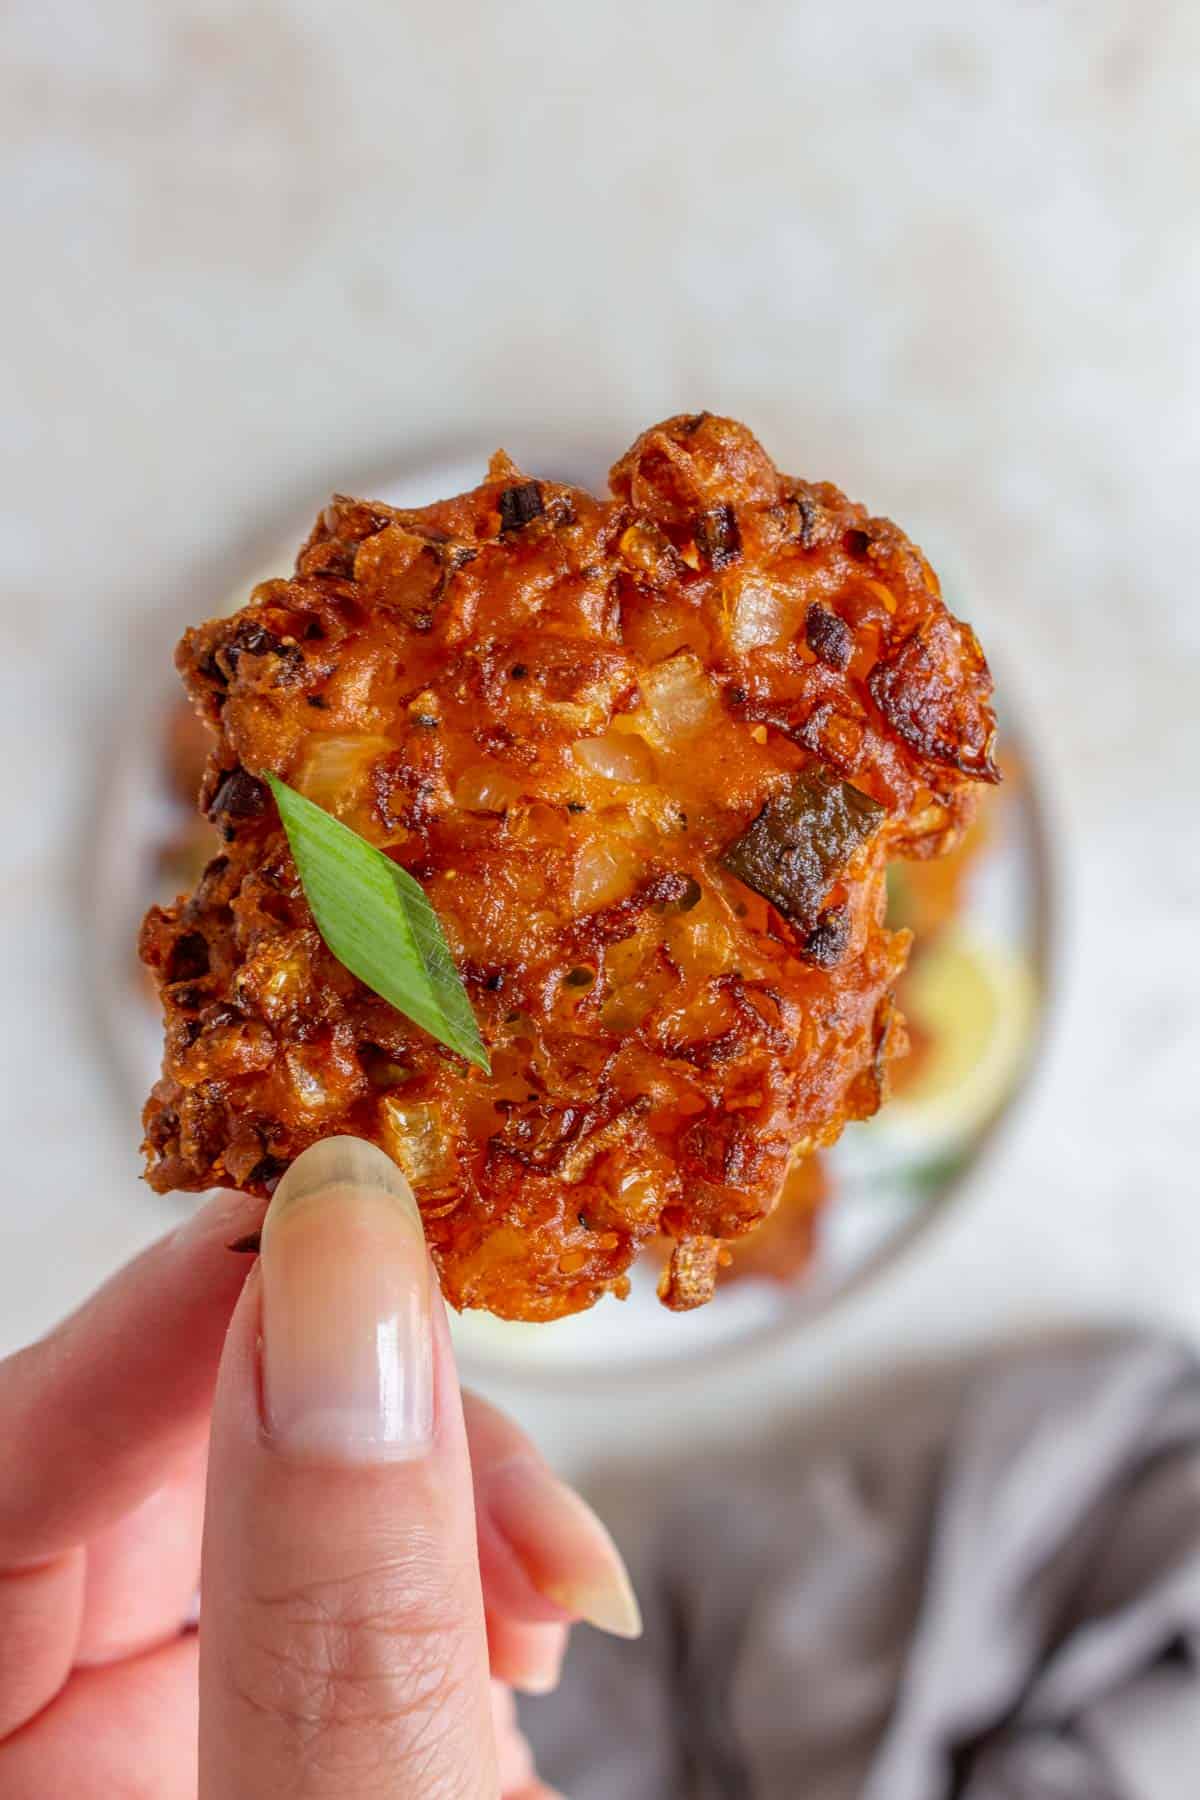 A hand holding up a single crispy onion fritter with a piece of green onion.